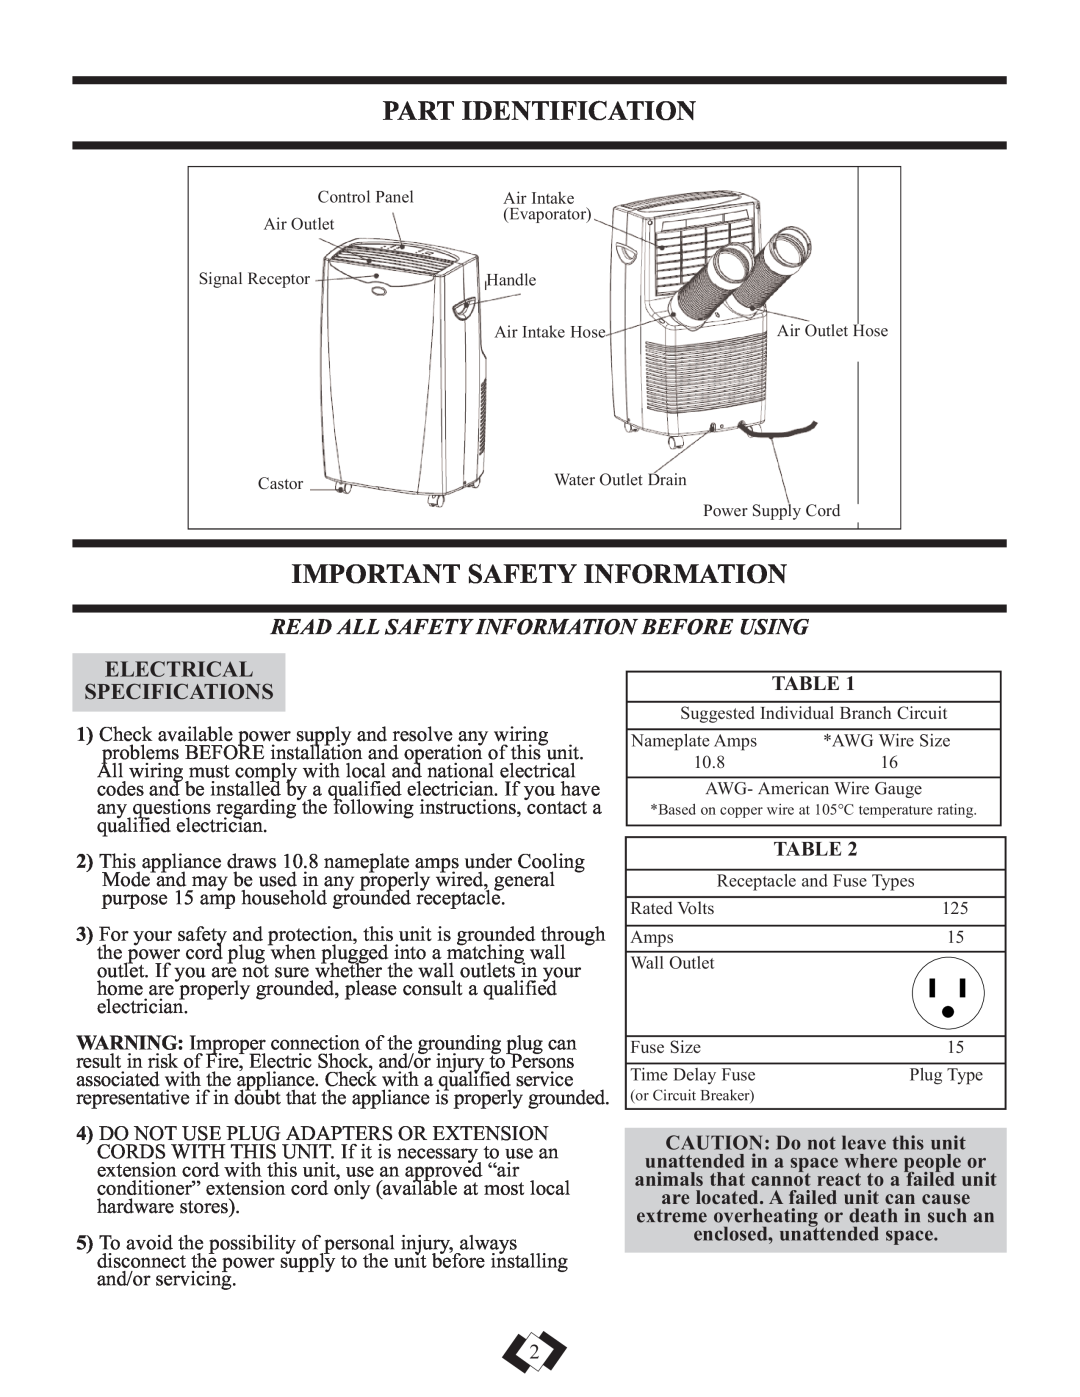 Danby DPAC12010H warranty Part Identification, Important Safety Information, Read All Safety Information Before Using 